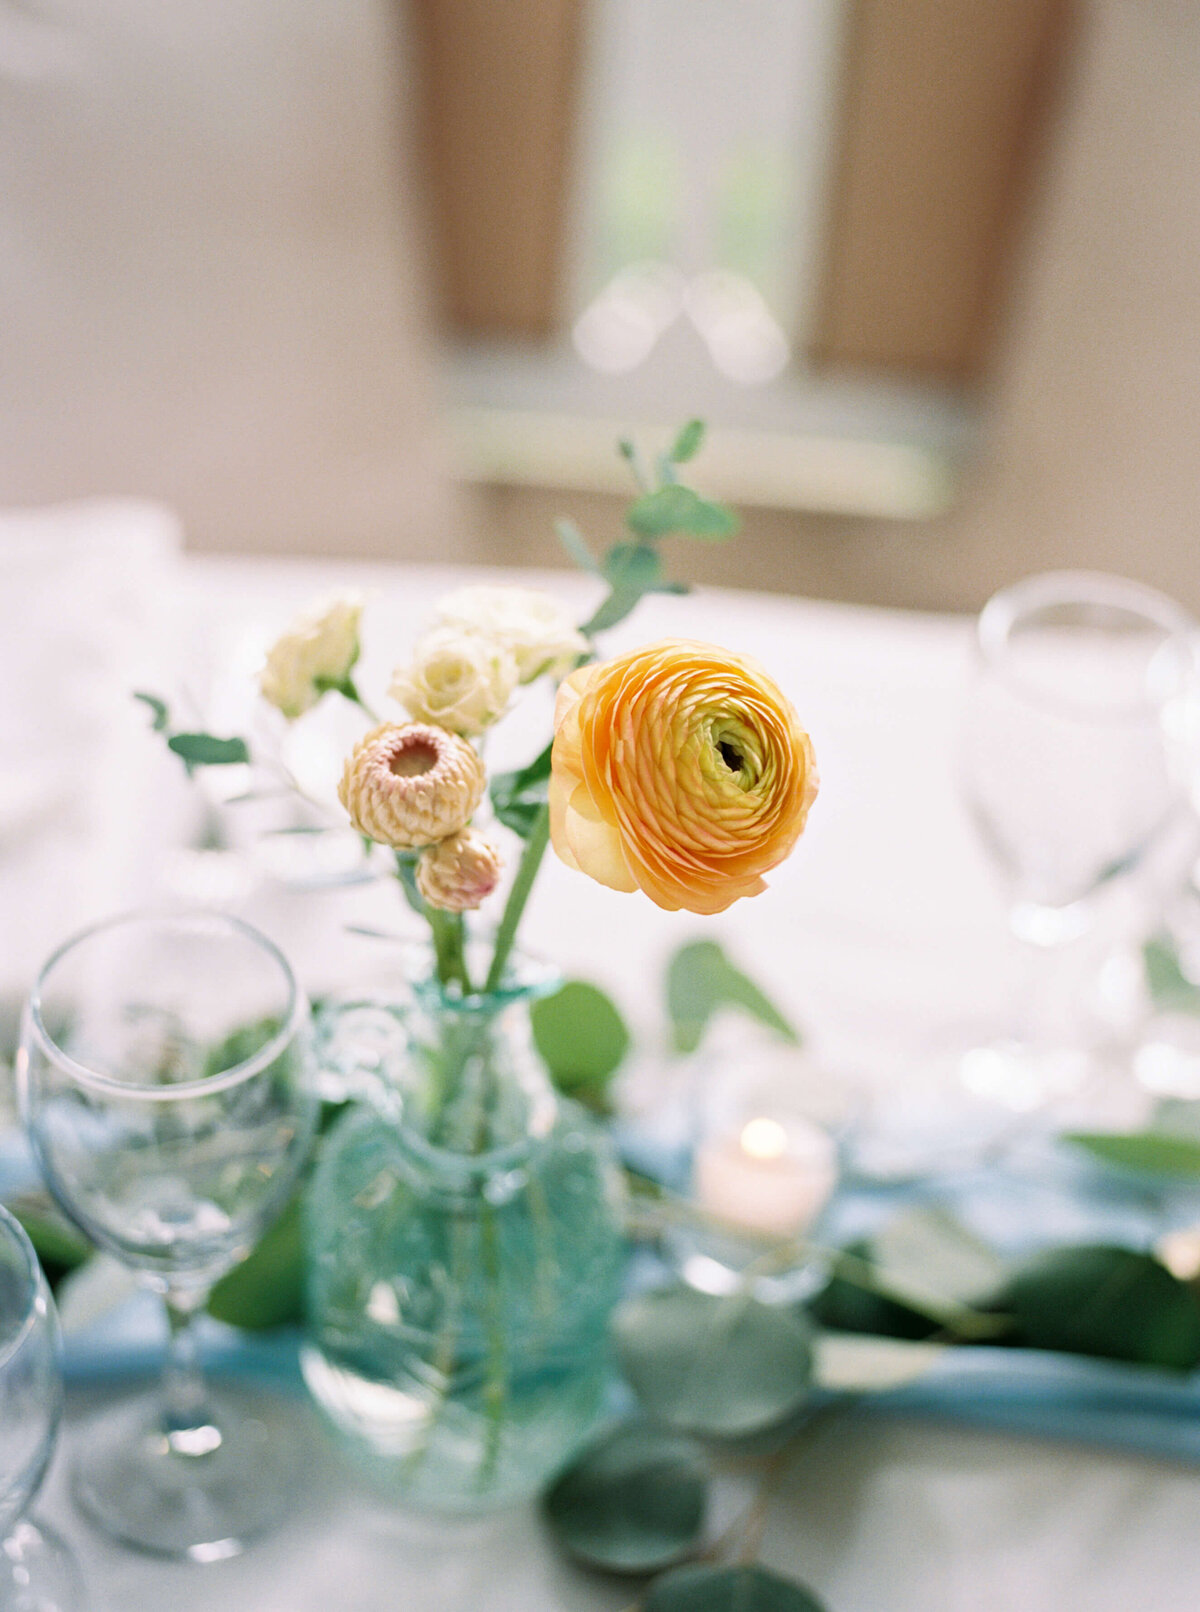 Ivory and peach wedding flowers in small glass on wedding reception table